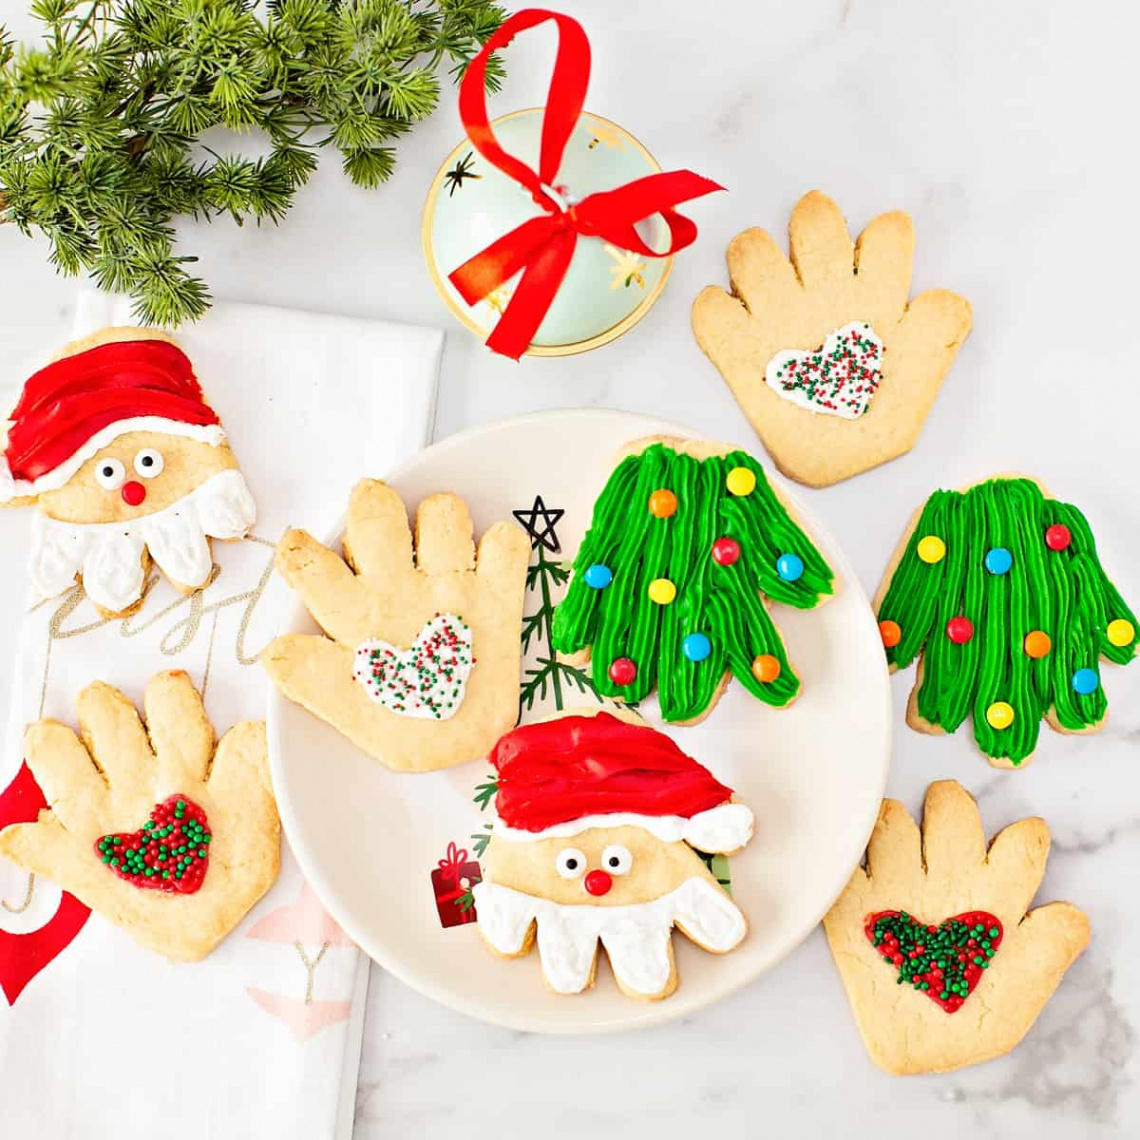 Fun Christmas Cookies - Handprint Cookies for the Holidays